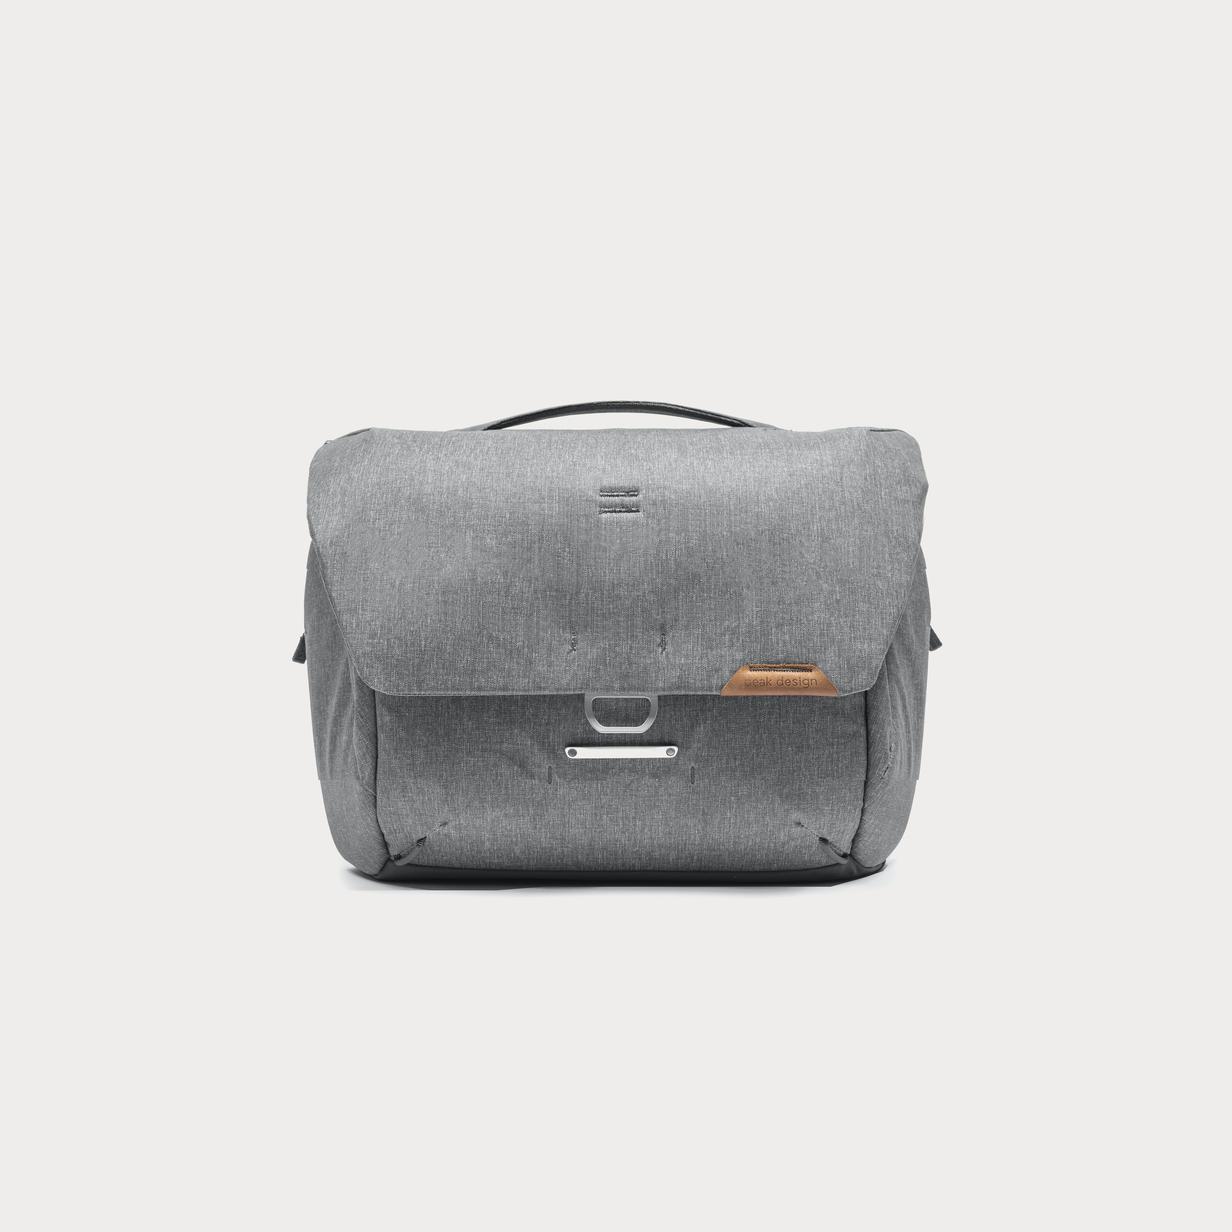 Moment peakdesign BEDM 13 AS 2 everyday messenger 13 L ash 01